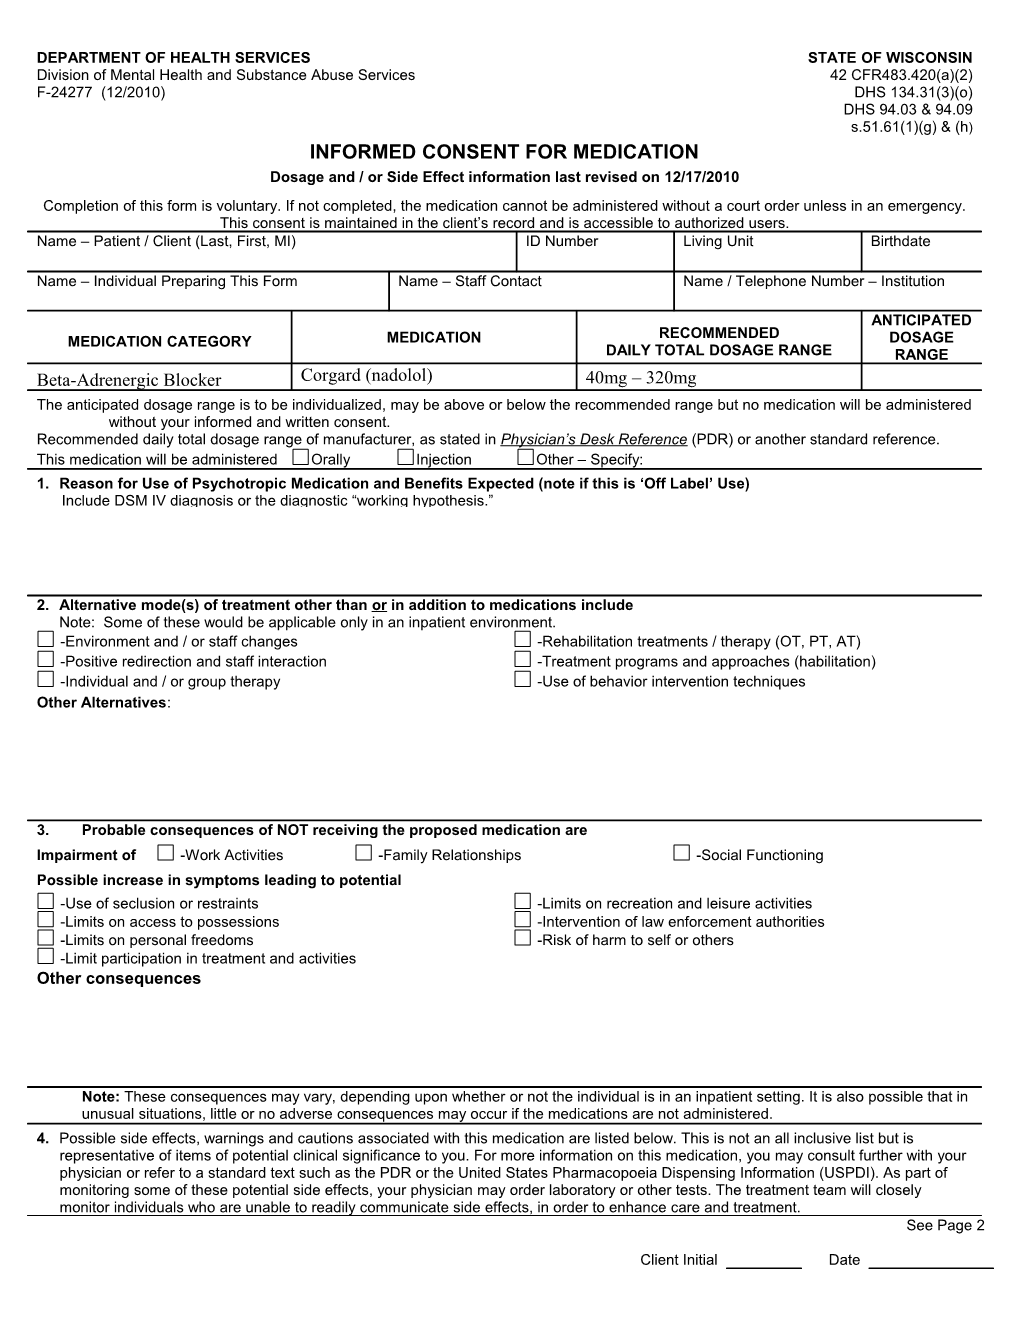 Informed Consent for Medication, F-24277, Corgard